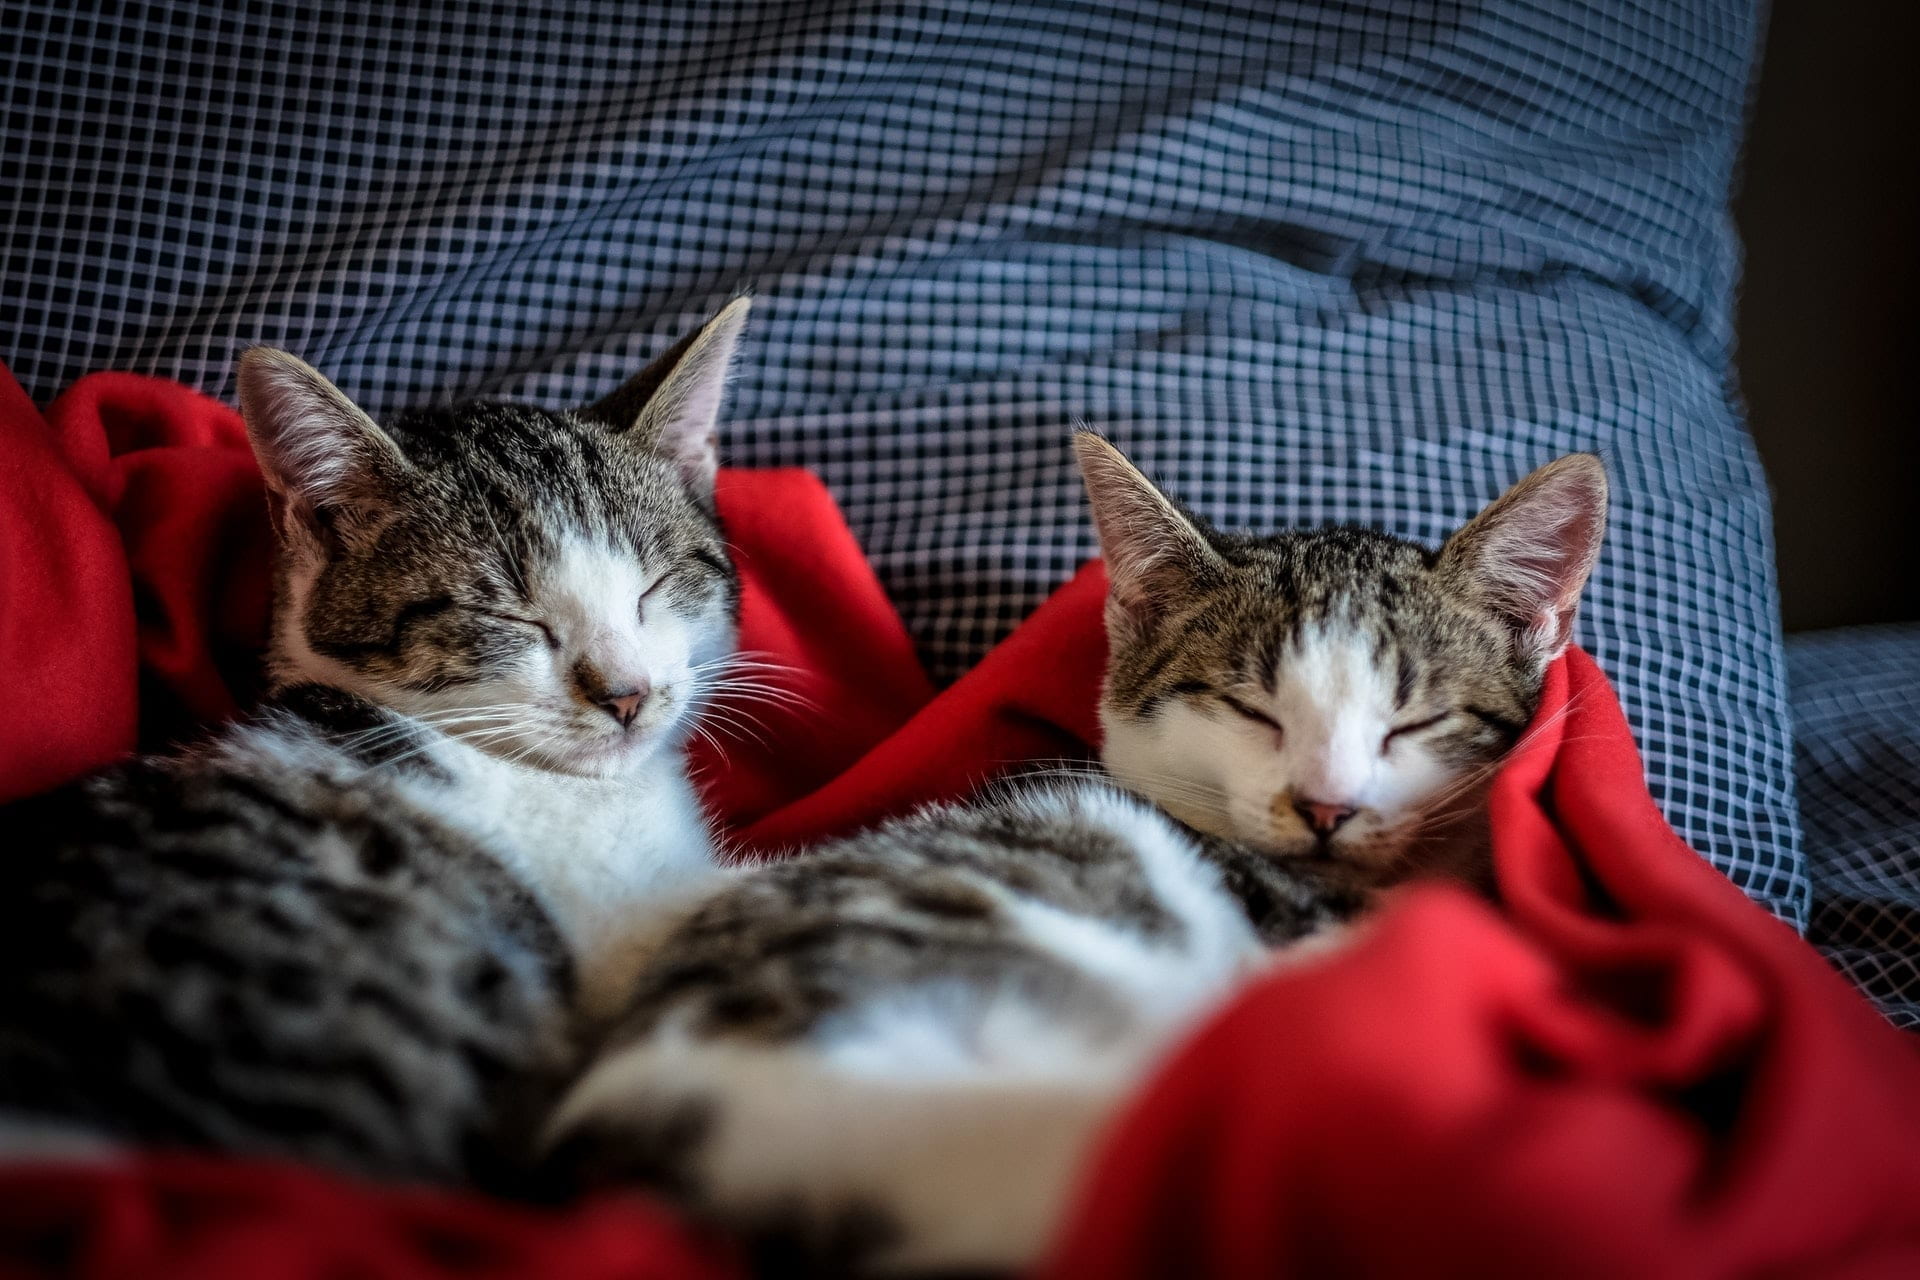 Two cats asleep on a blanket.